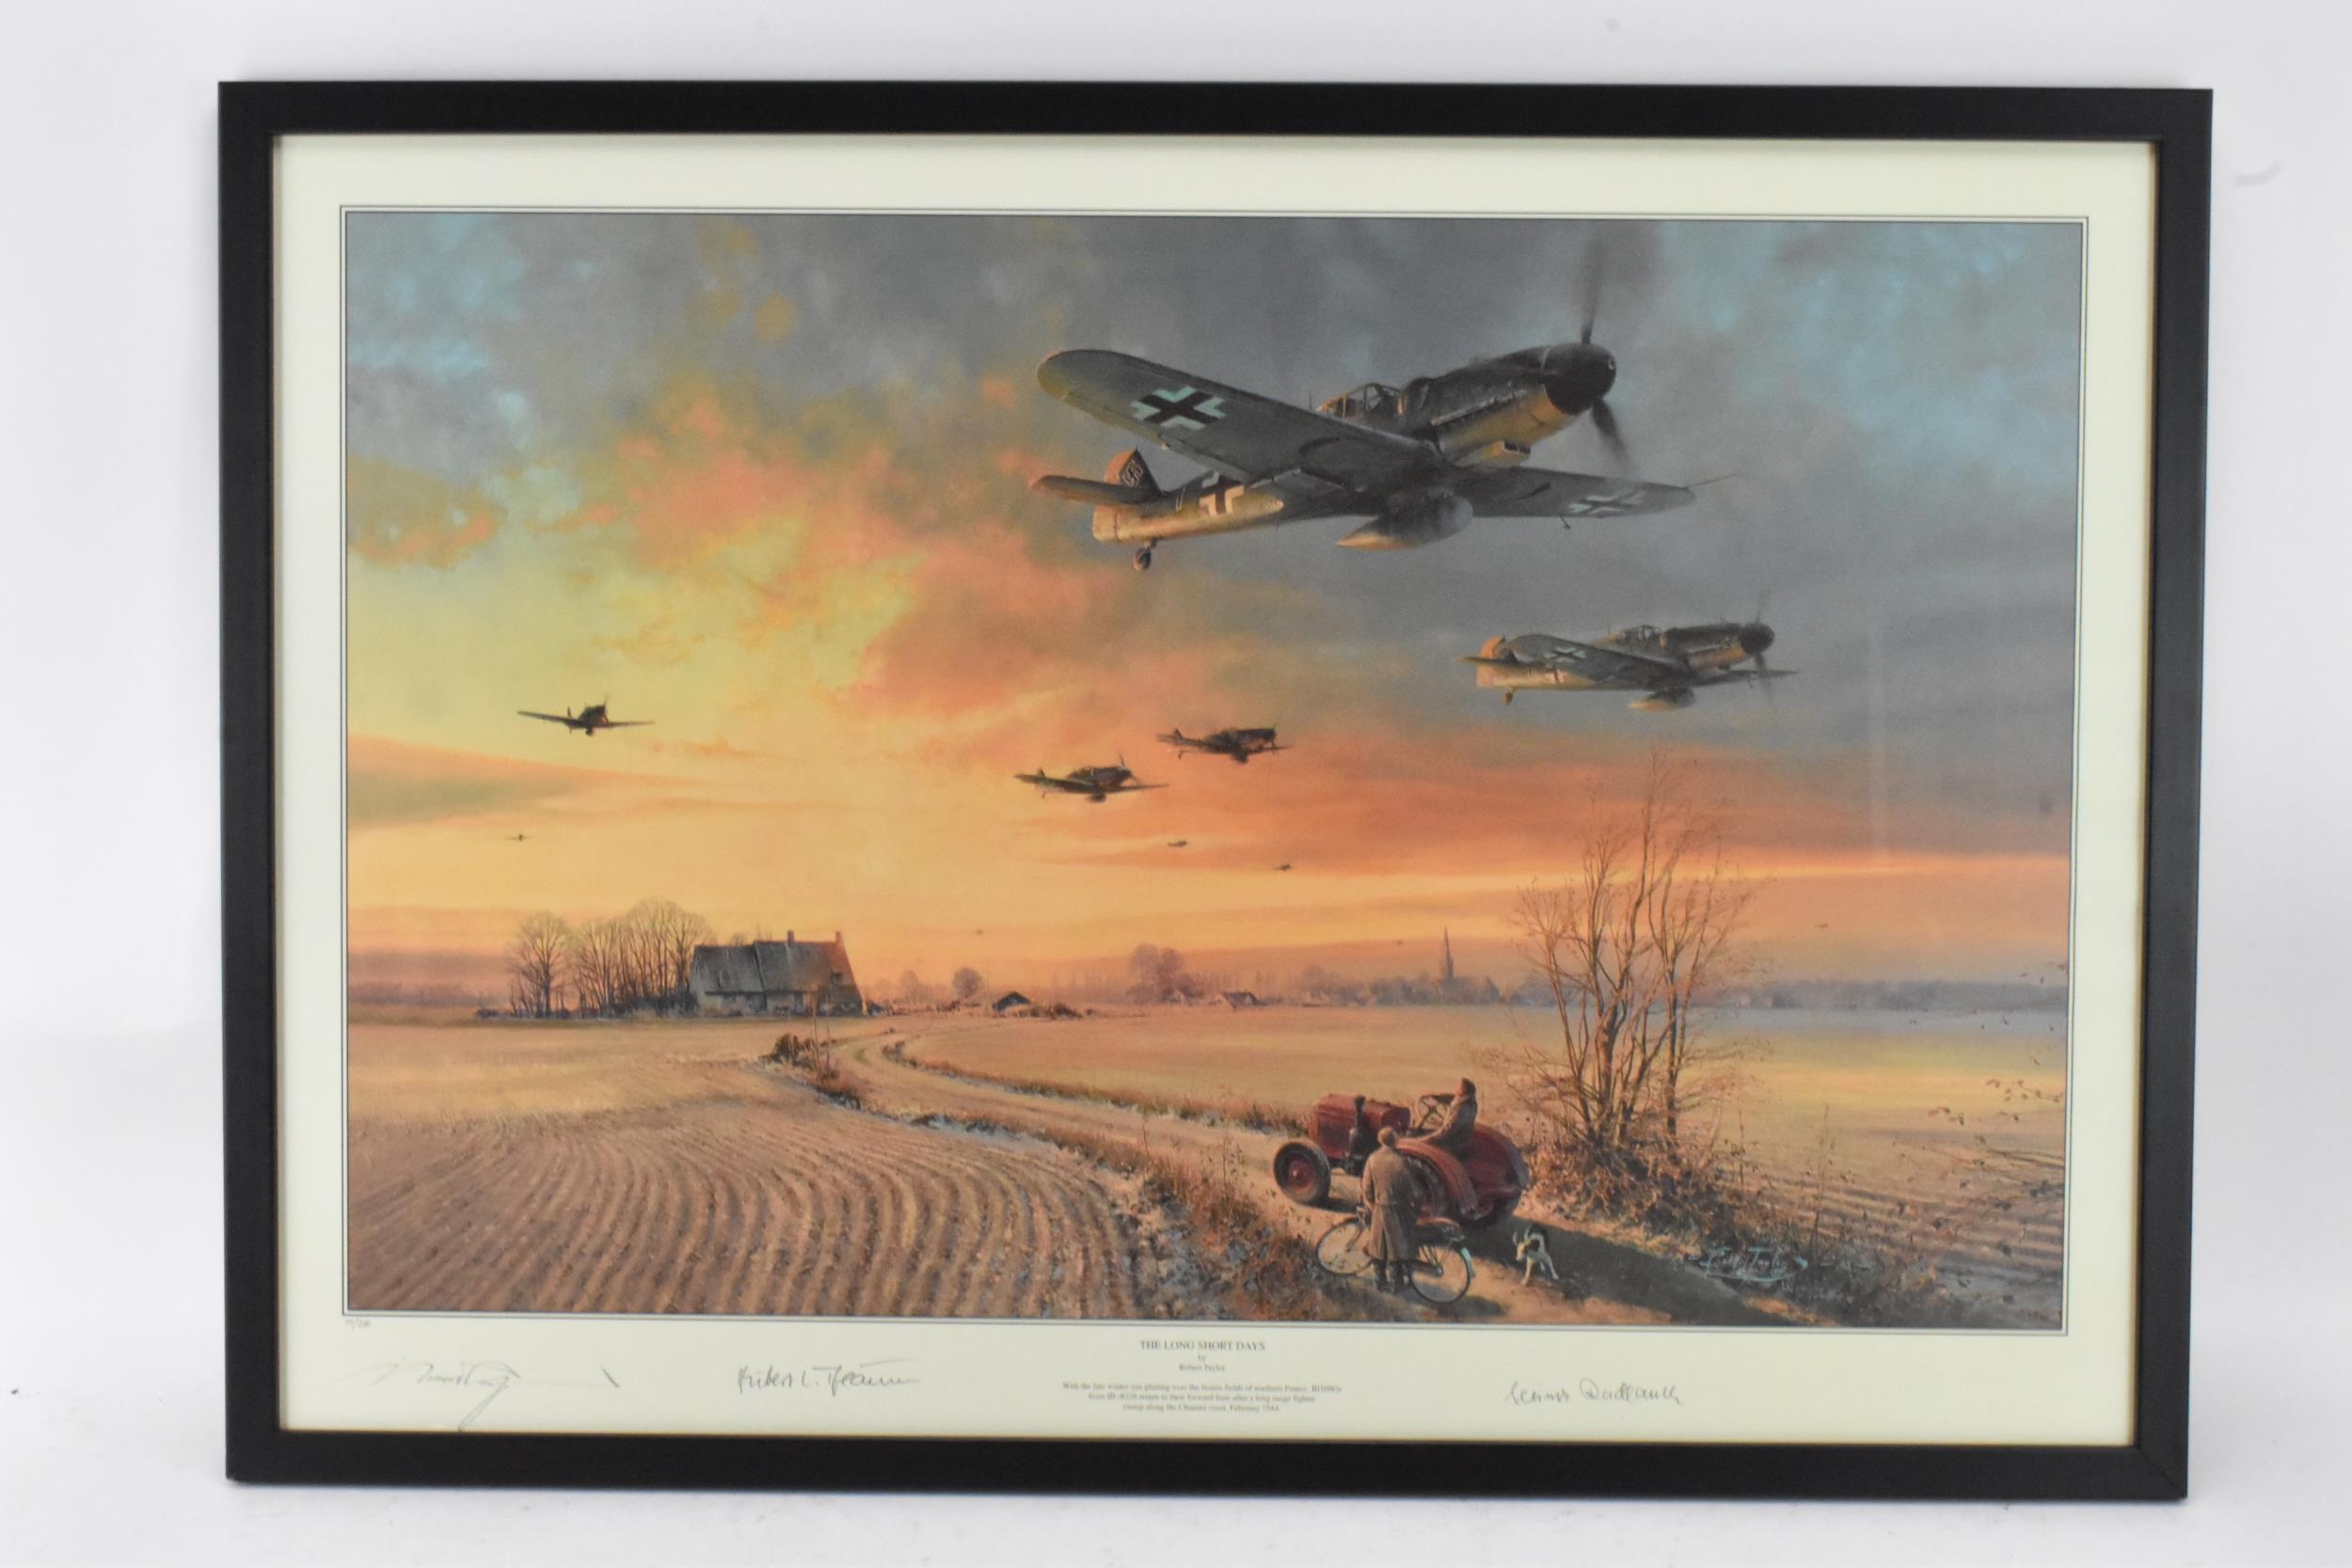 Robert Taylor - A signed limited edition print entitled 'The Long Short Days', numbered 77/250, with